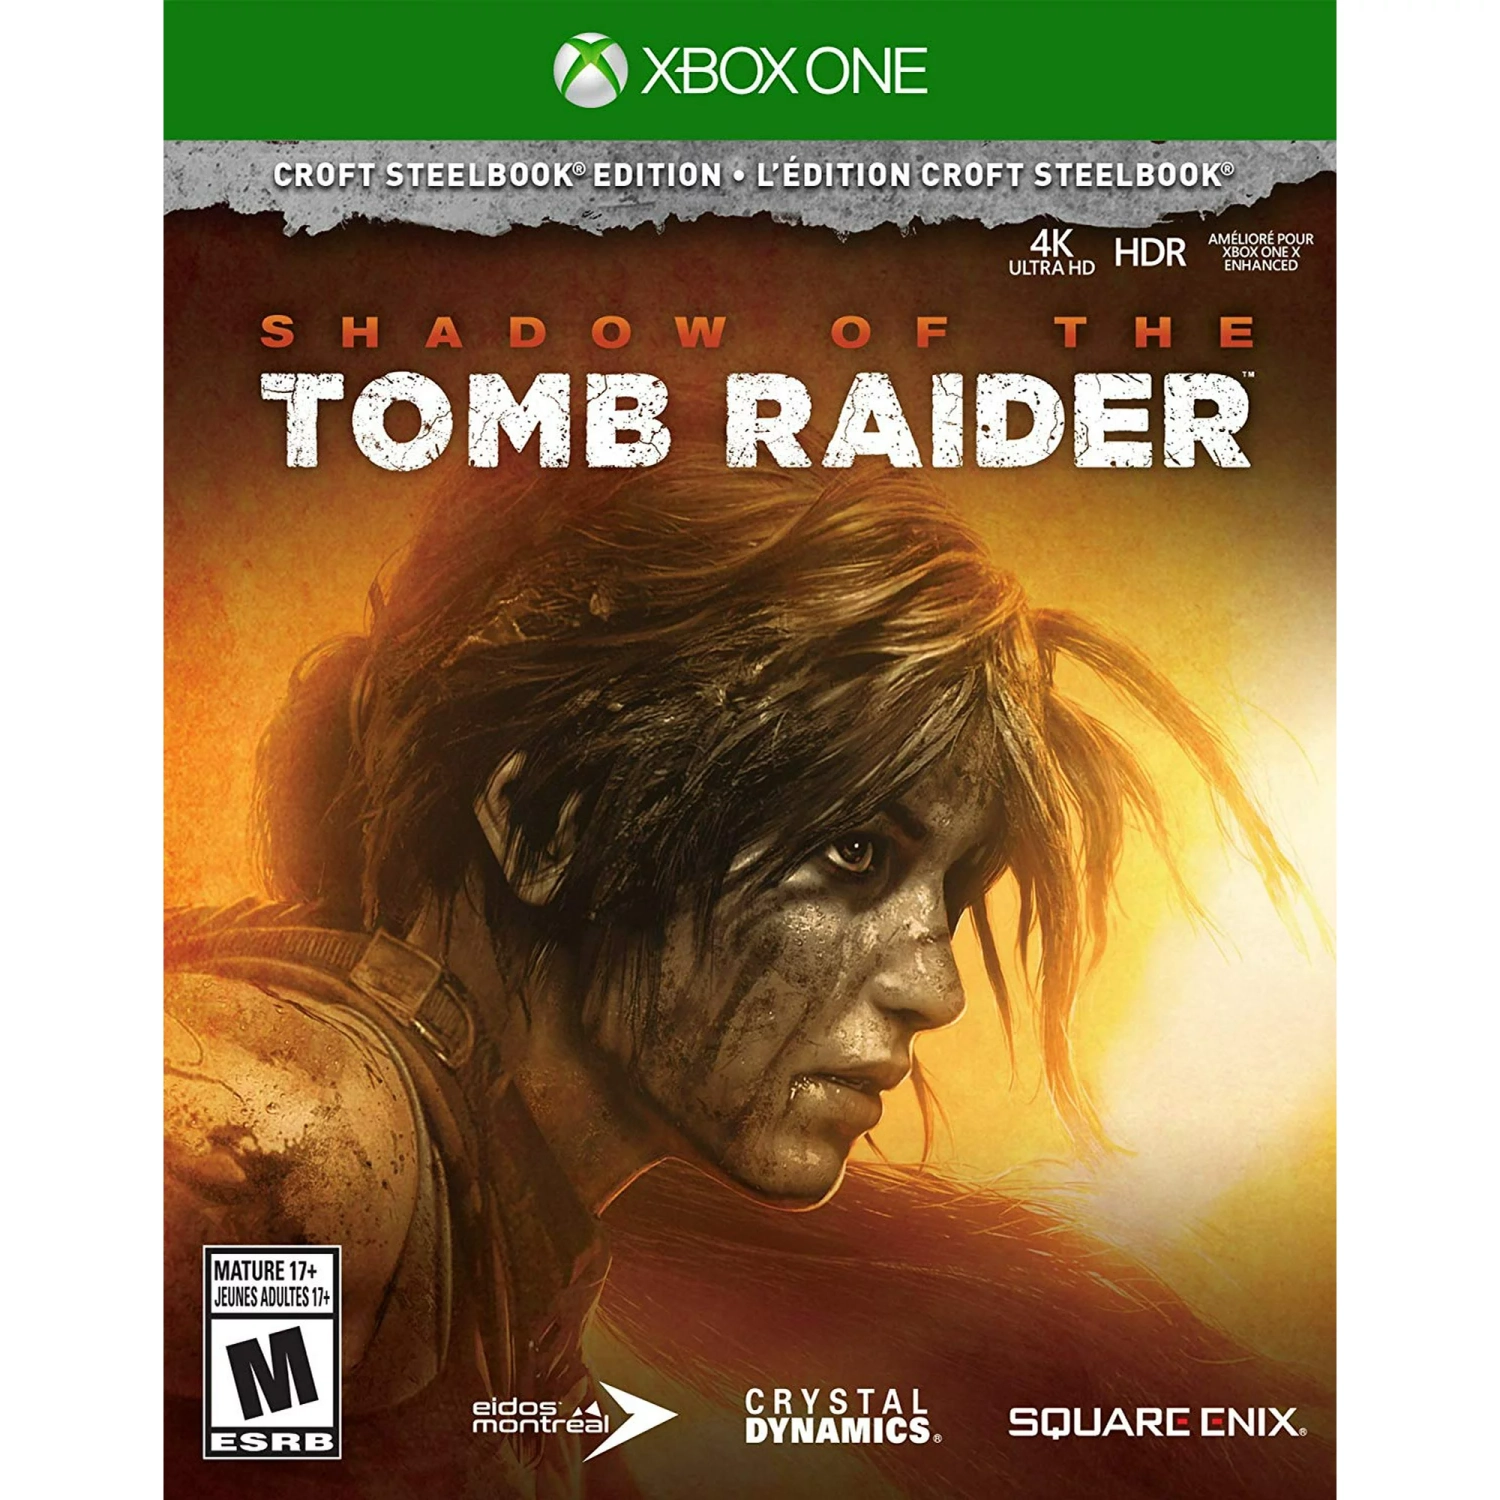 Shadow of the Tomb Raider - Croft Steelbook Edition for Xbox One [VIDEOGAMES]